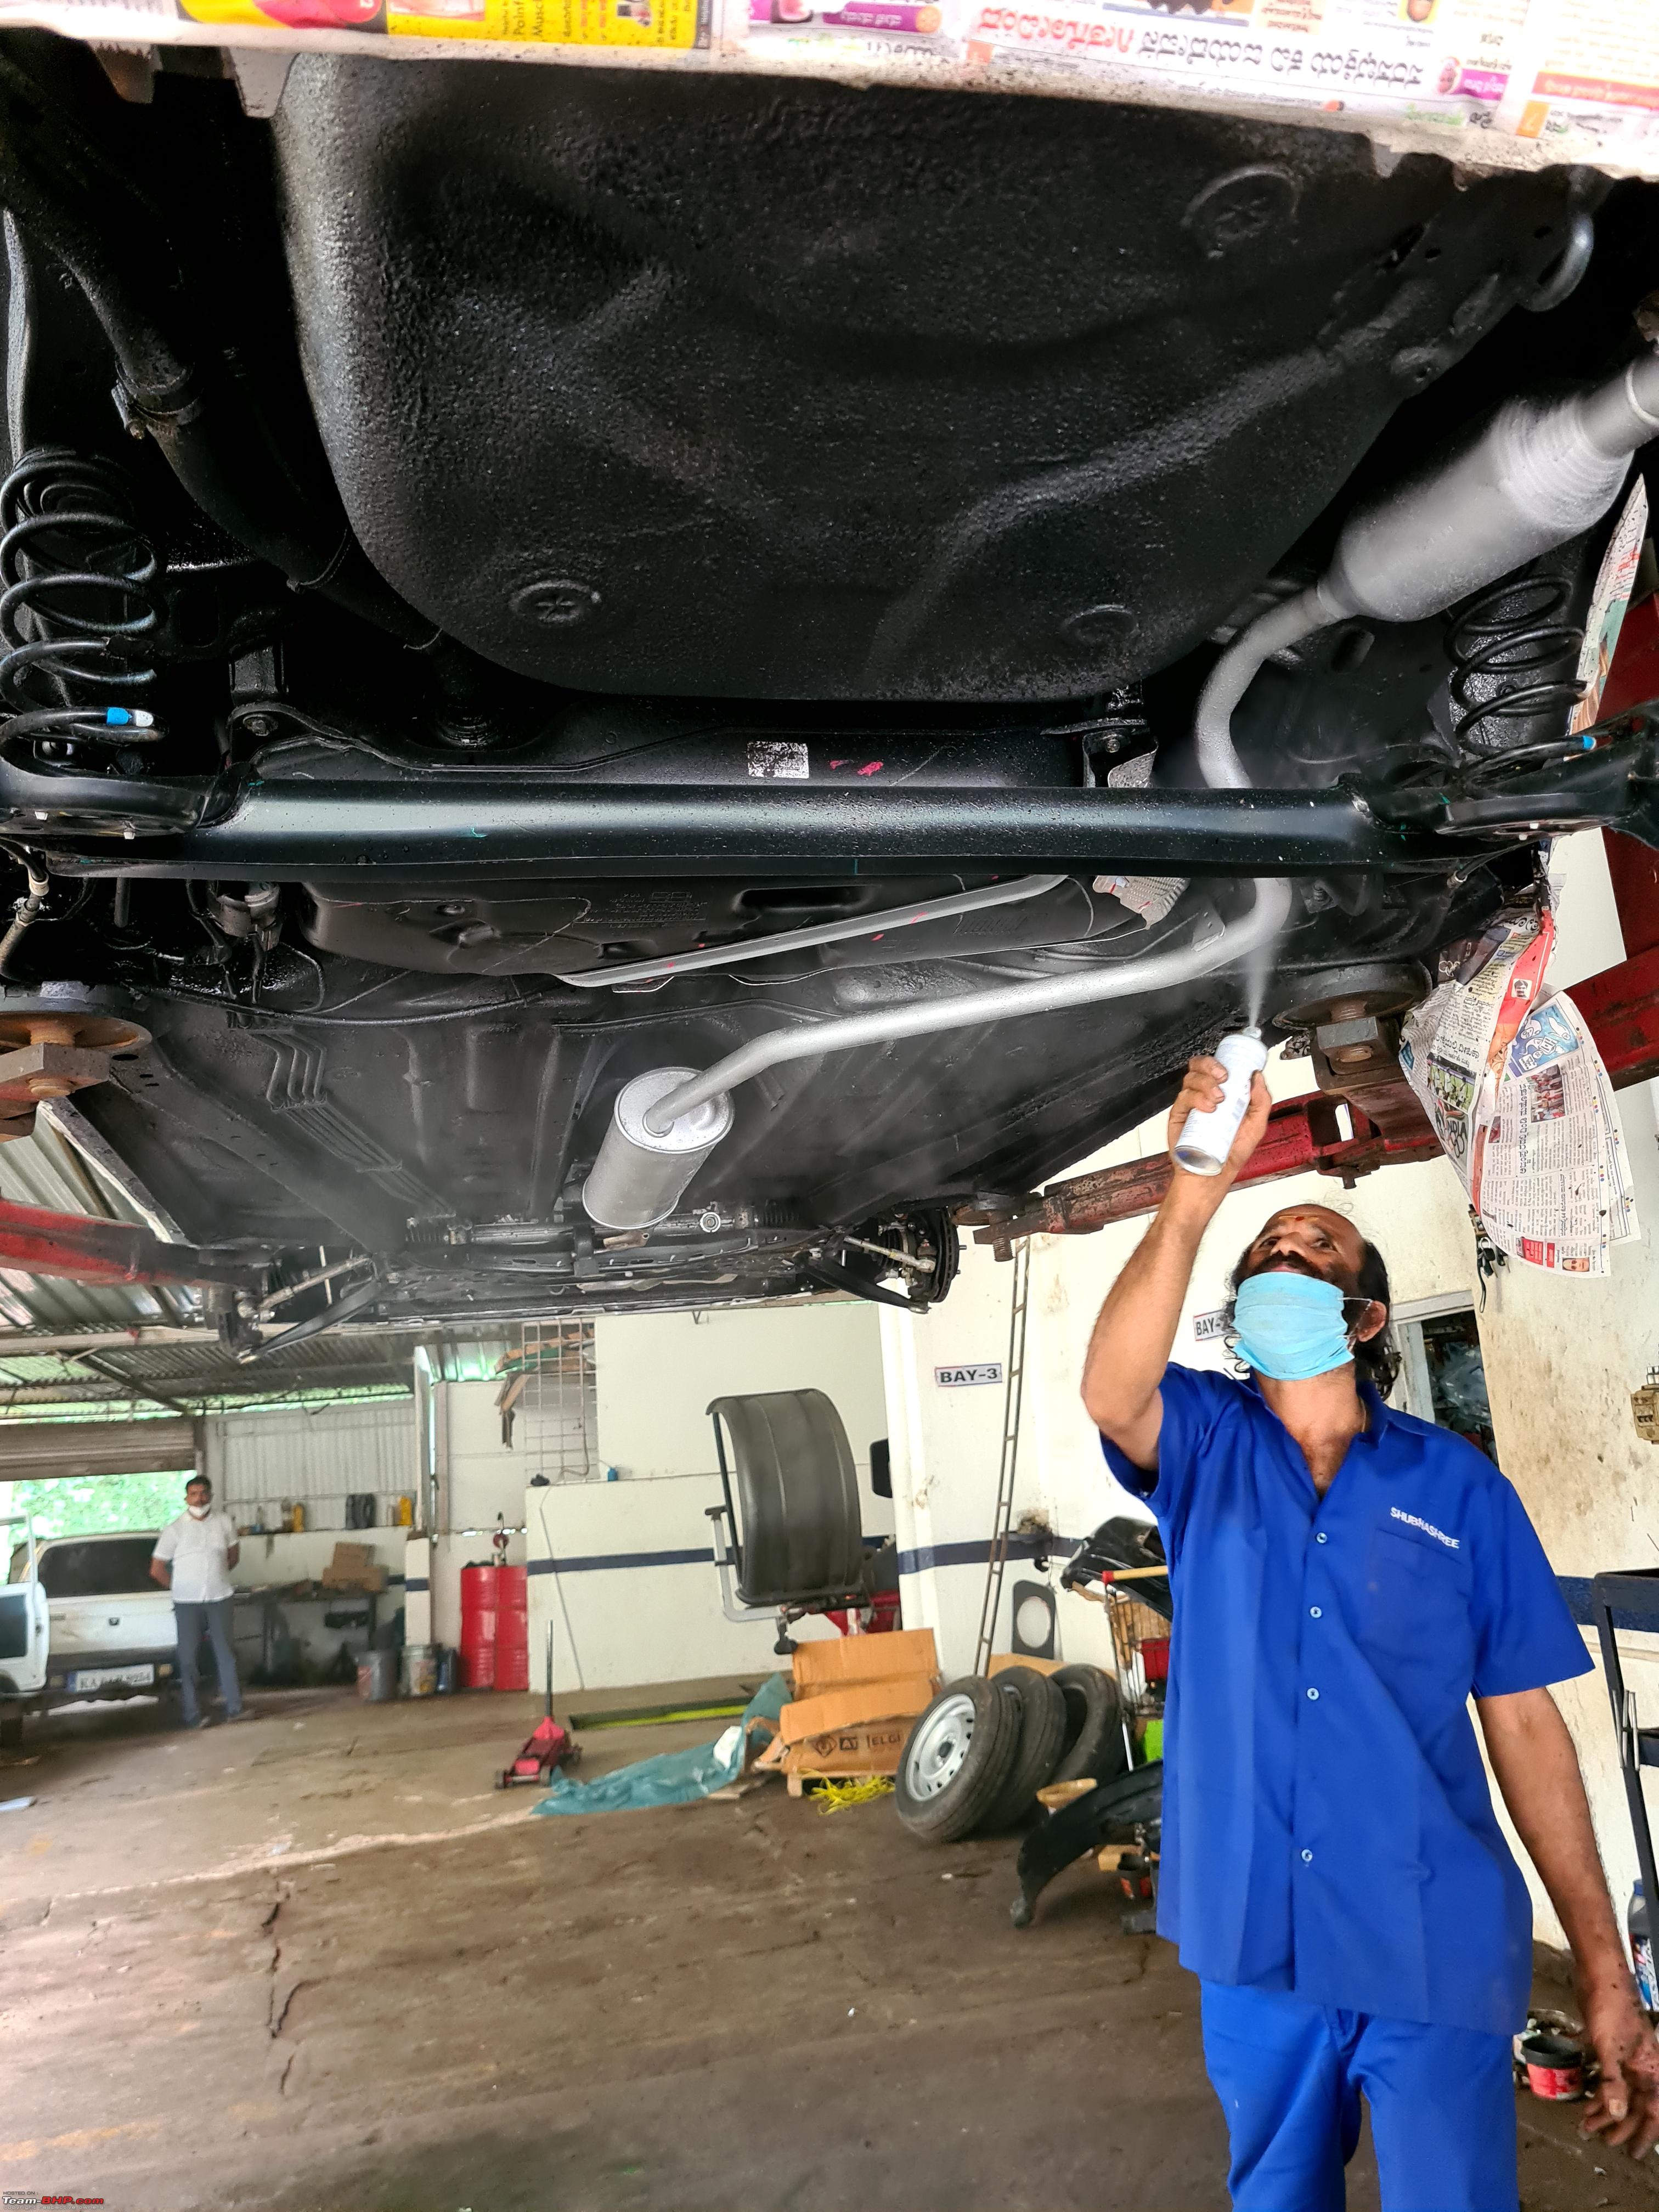 Underbody treatment / Anti-rust coating for the car - Page 26 - Team-BHP